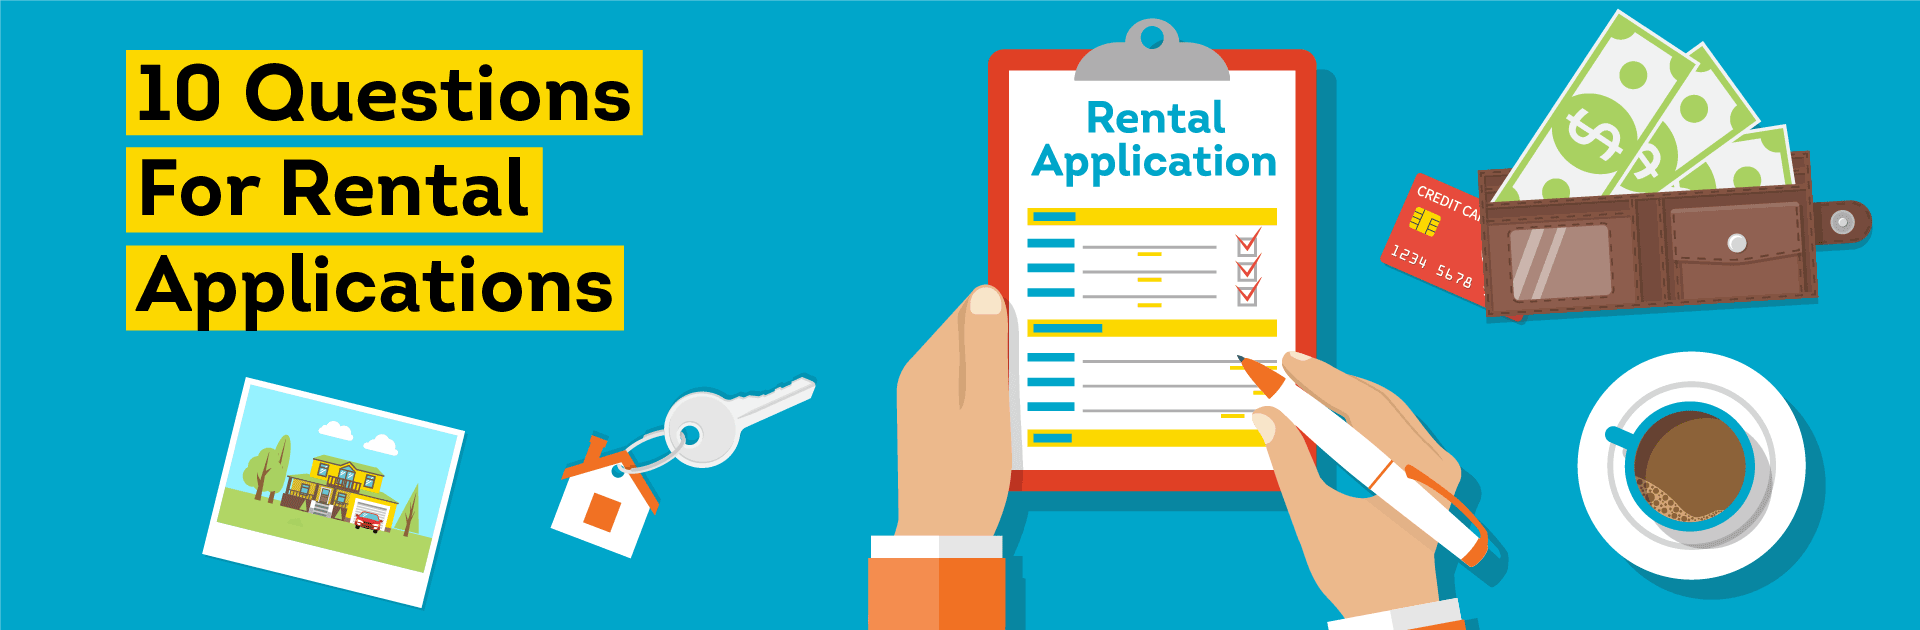 10 questions to ask rental applicant article image